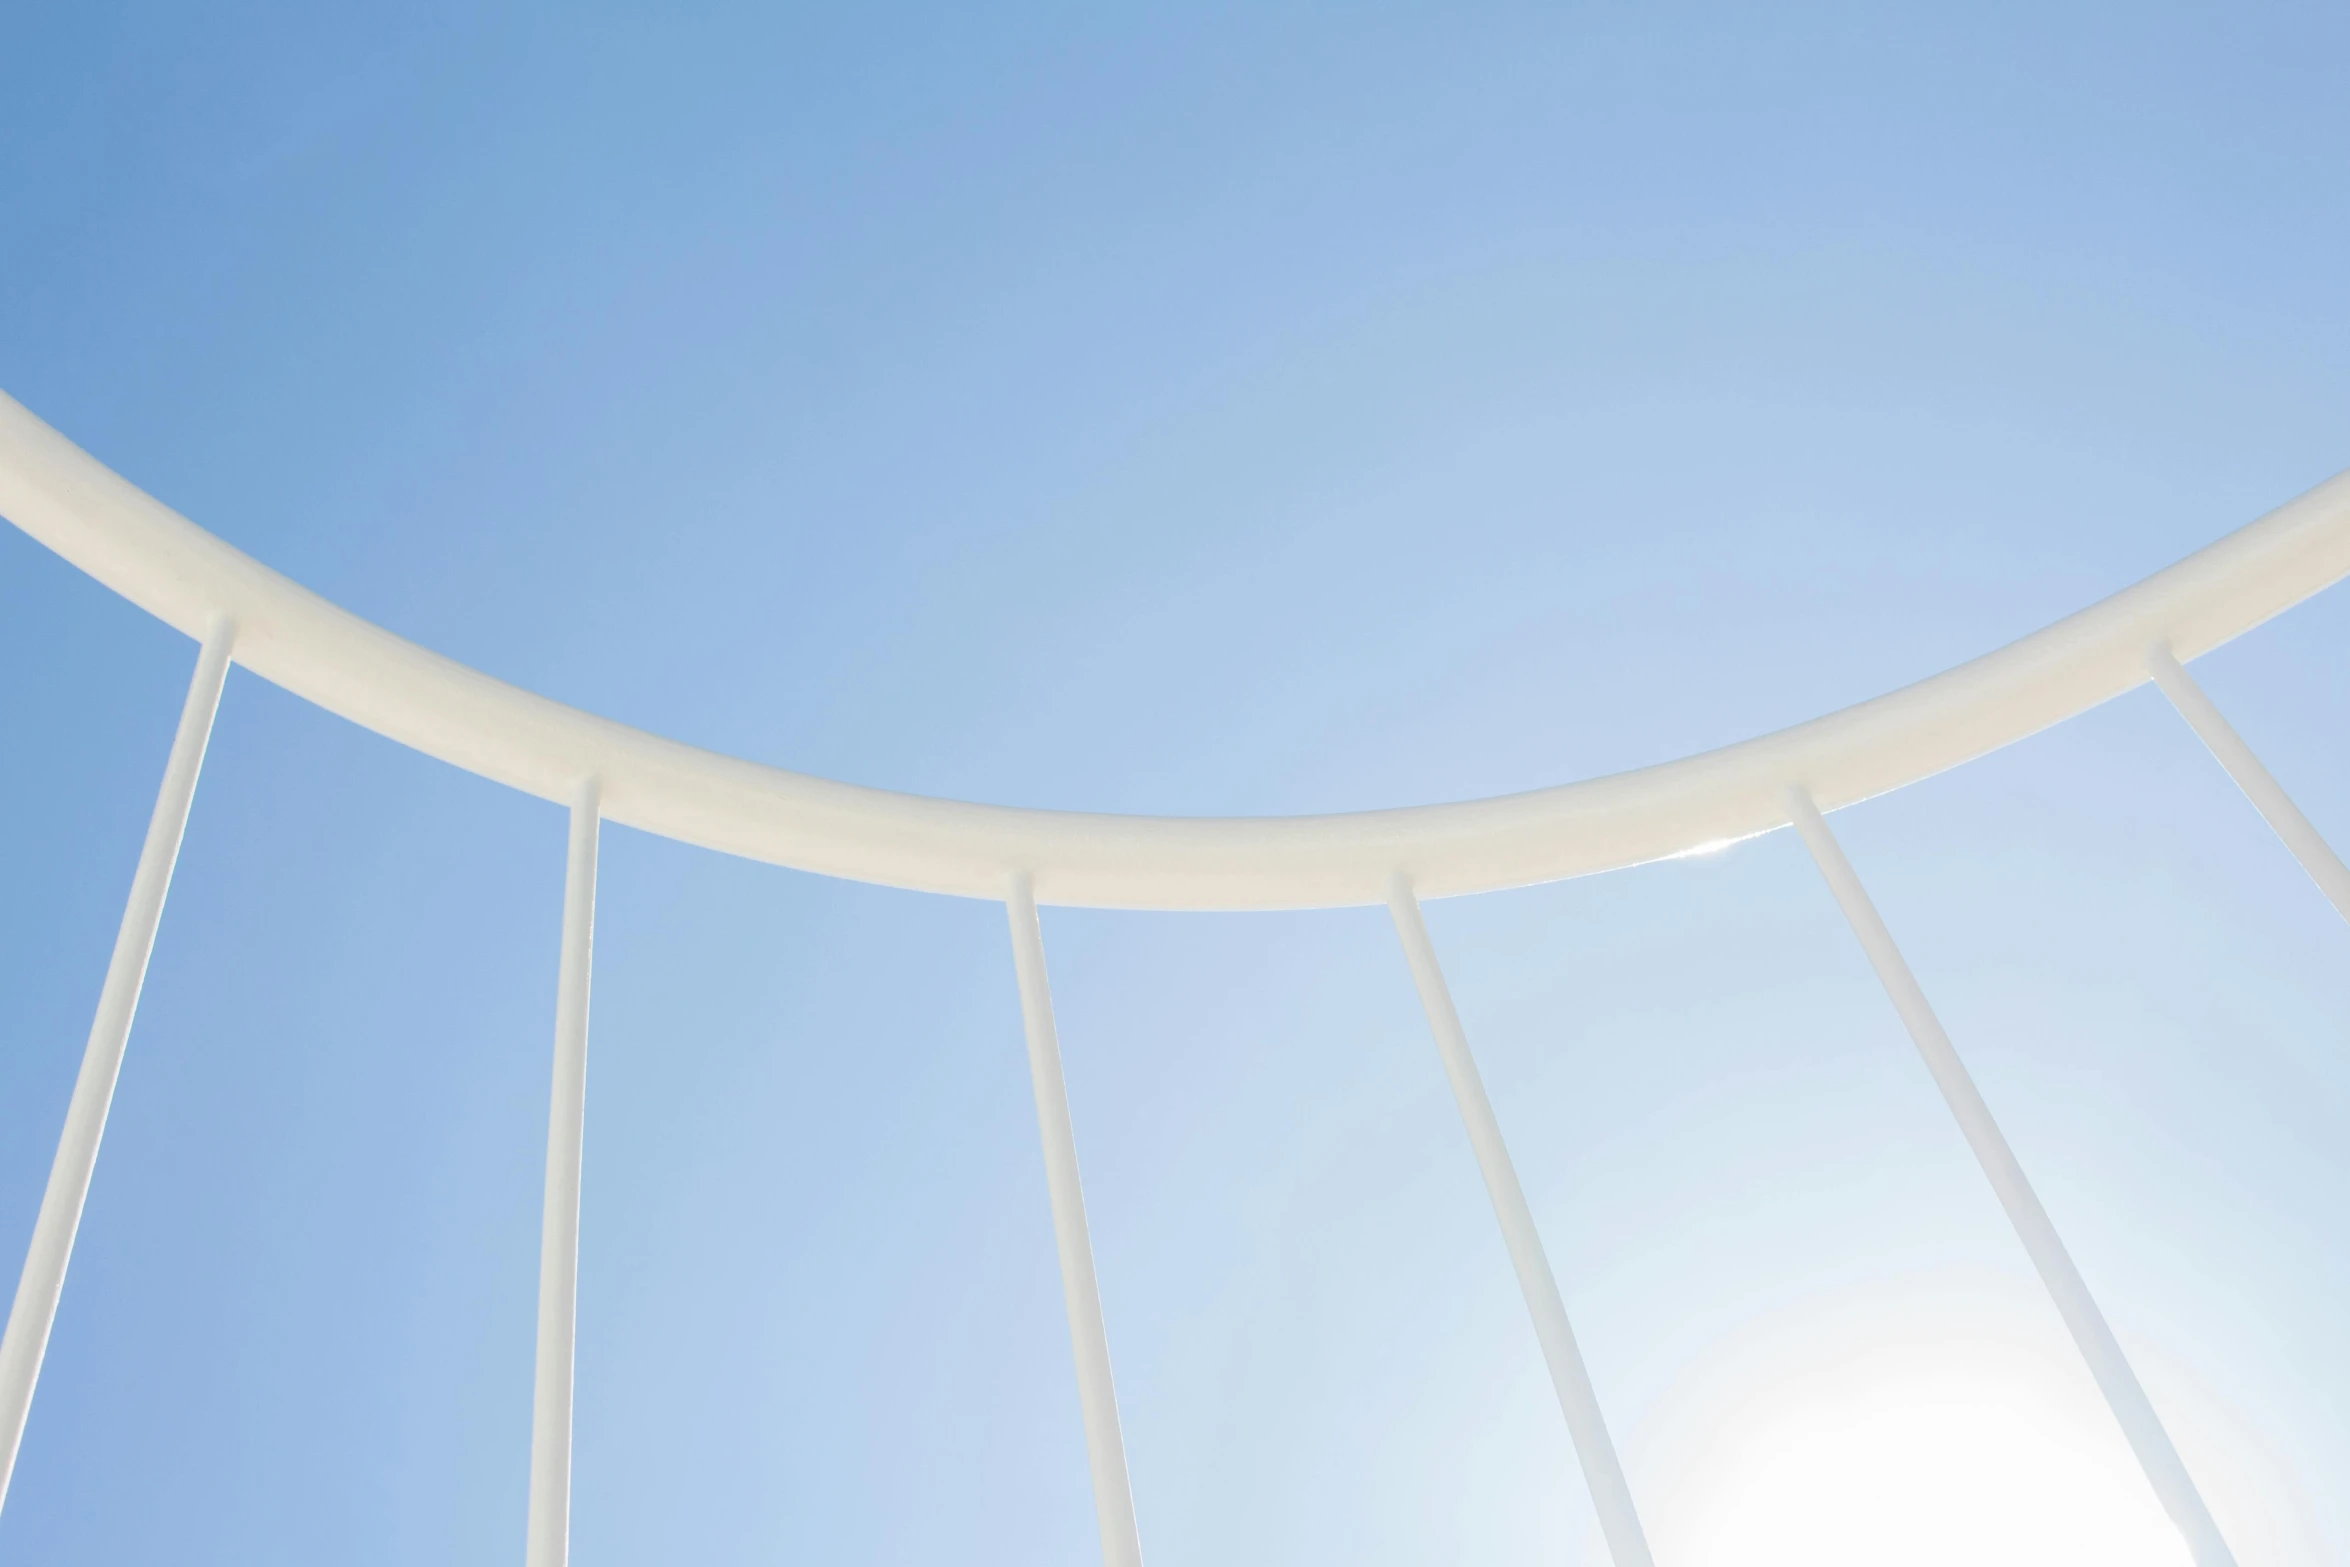 a man flying through the air while riding a skateboard, an abstract sculpture, inspired by Lucio Fontana, unsplash, minimalism, sky bridge, white and pale blue, circular, sun shining